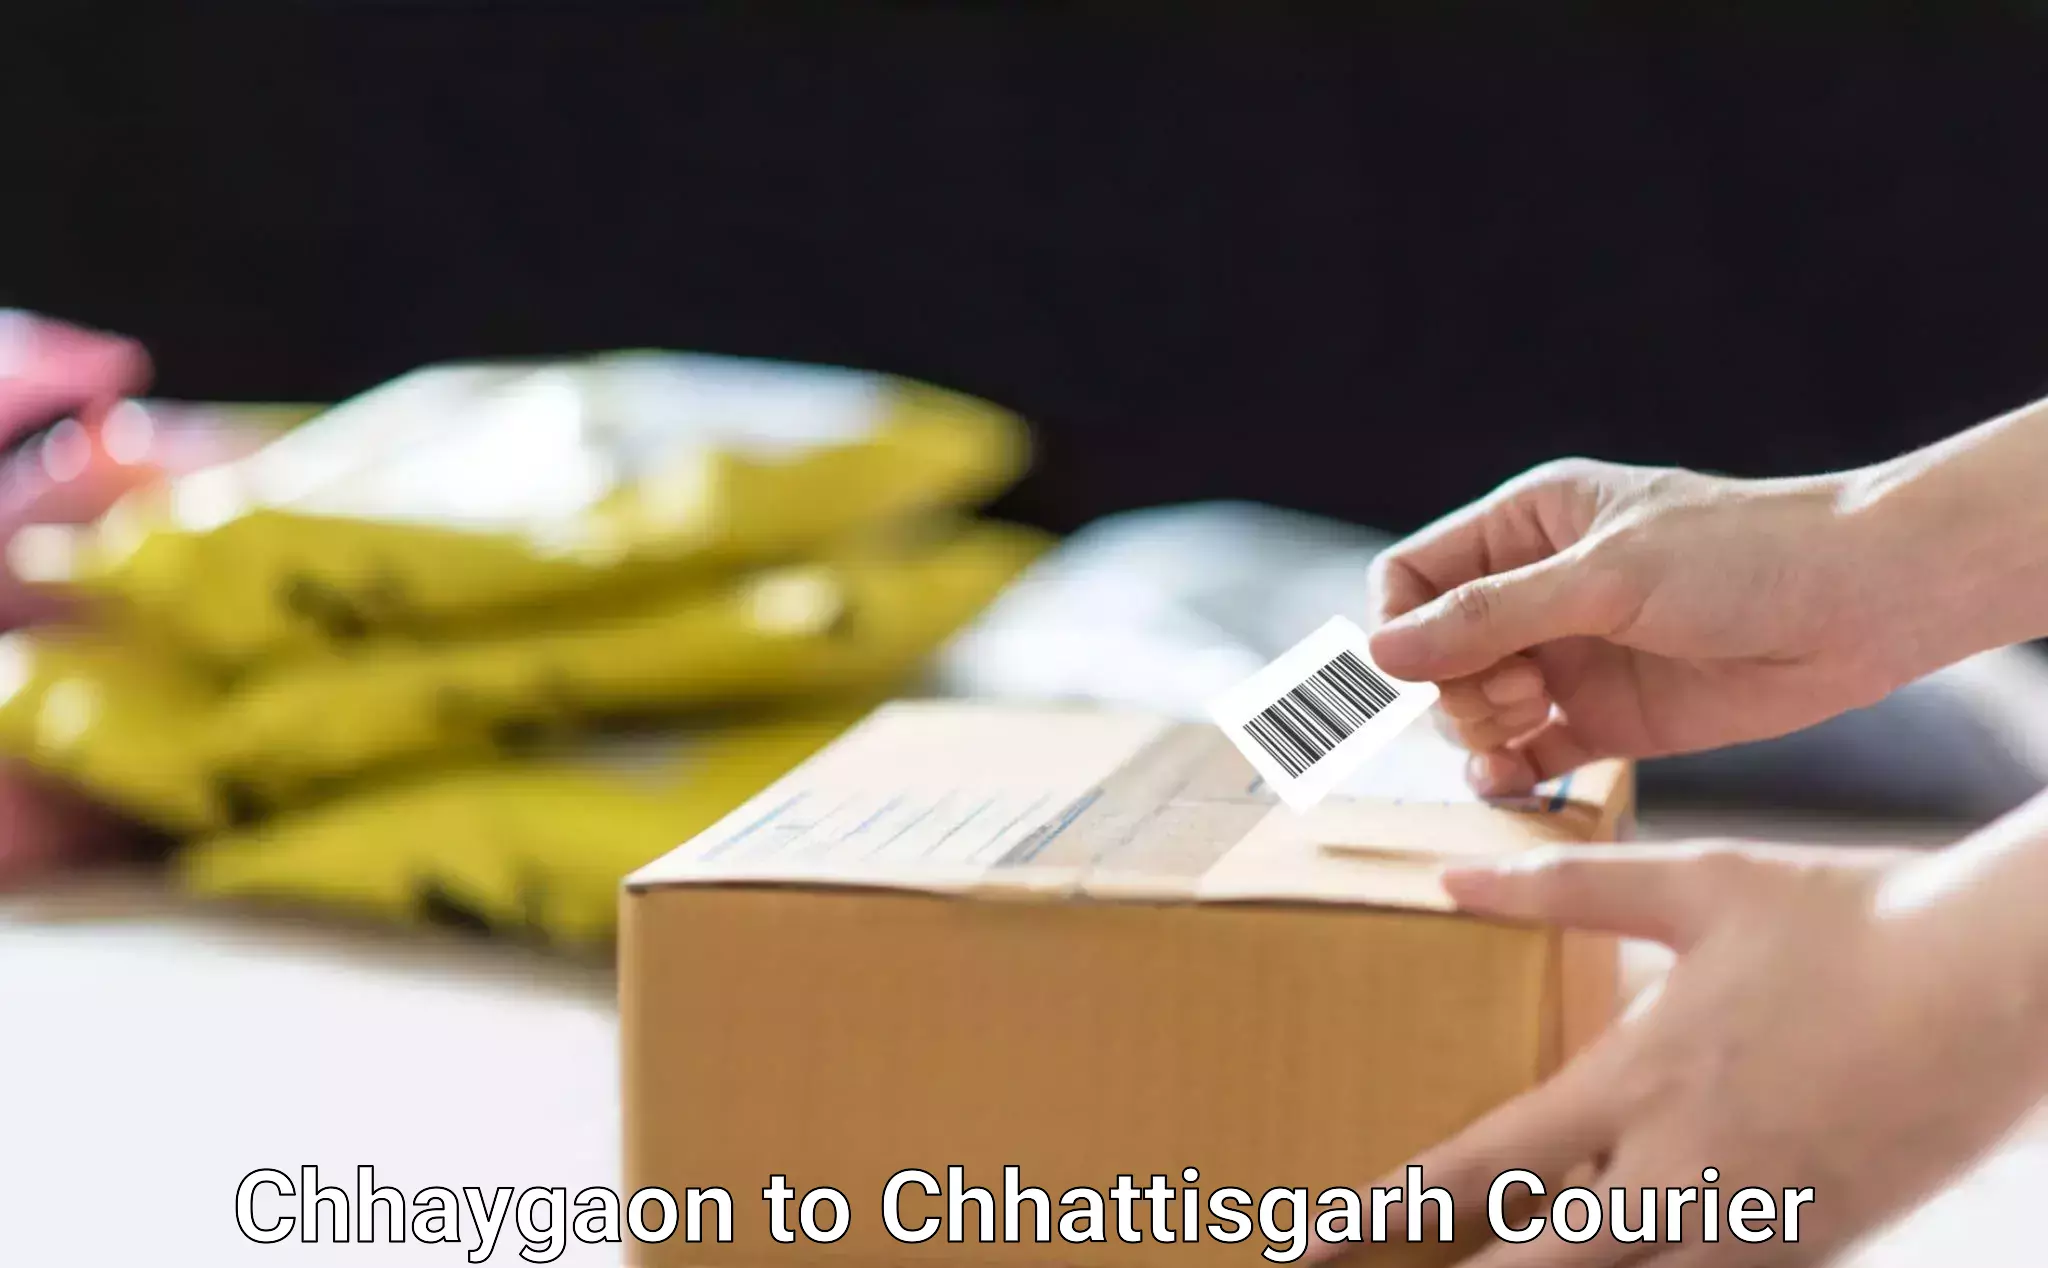 High-speed parcel service Chhaygaon to Pendra